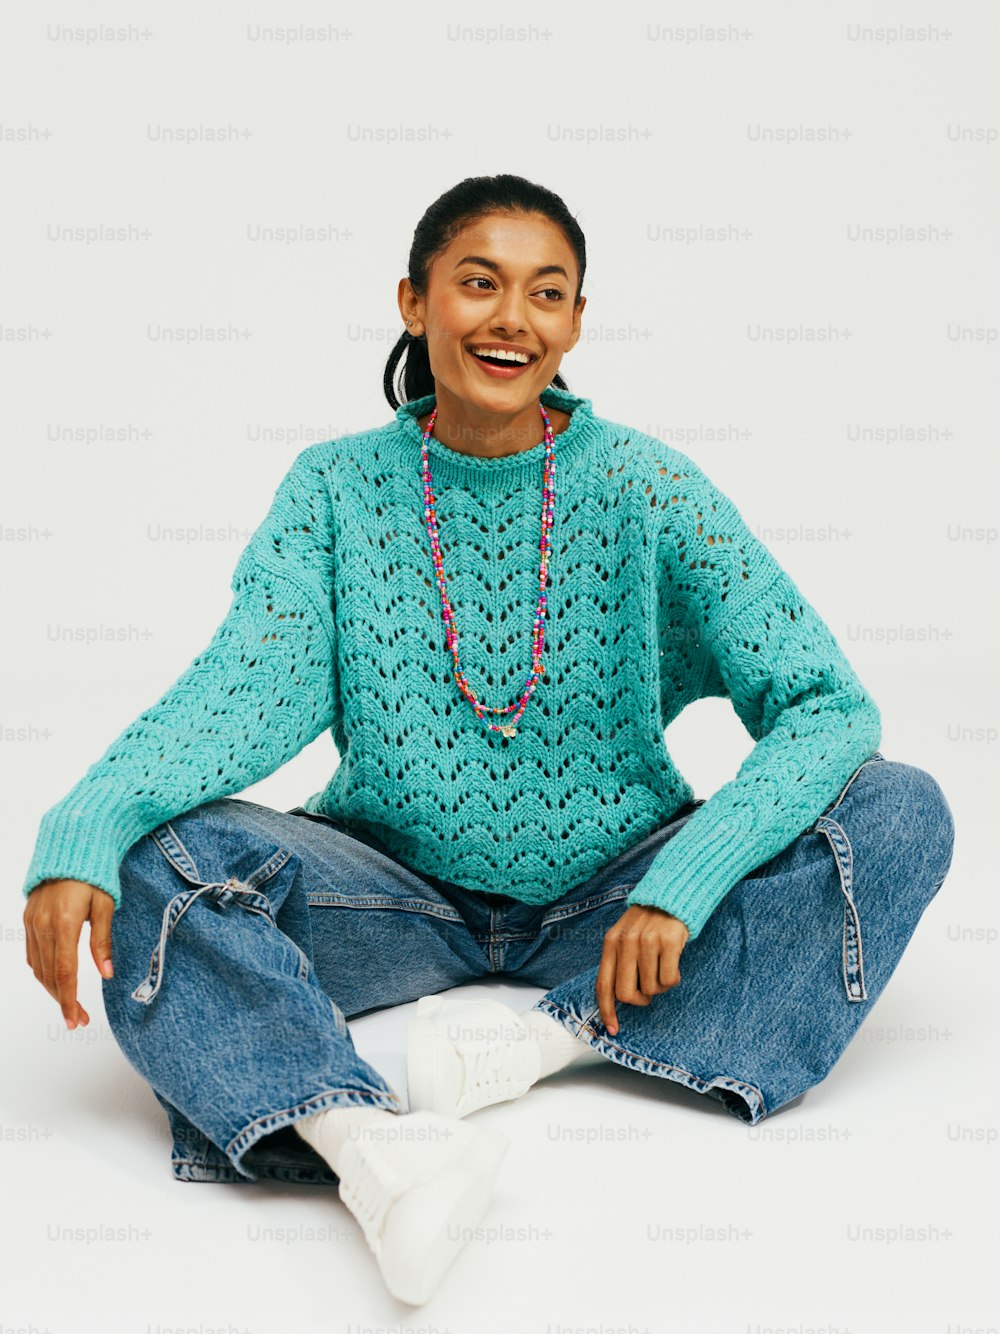 a woman sitting on the floor wearing a blue sweater and jeans